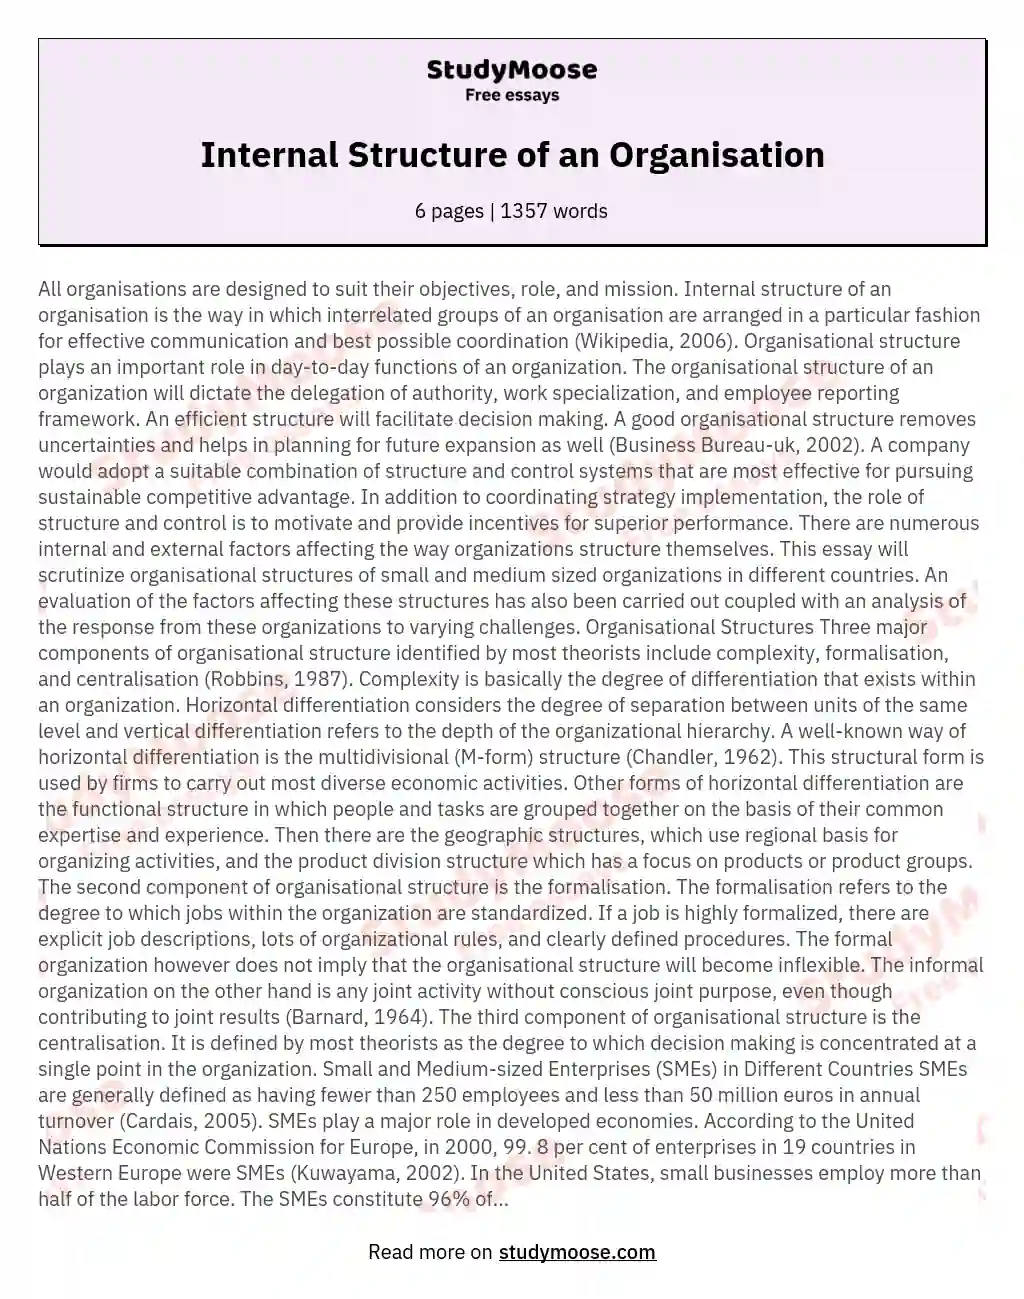 essay question about organizational structure